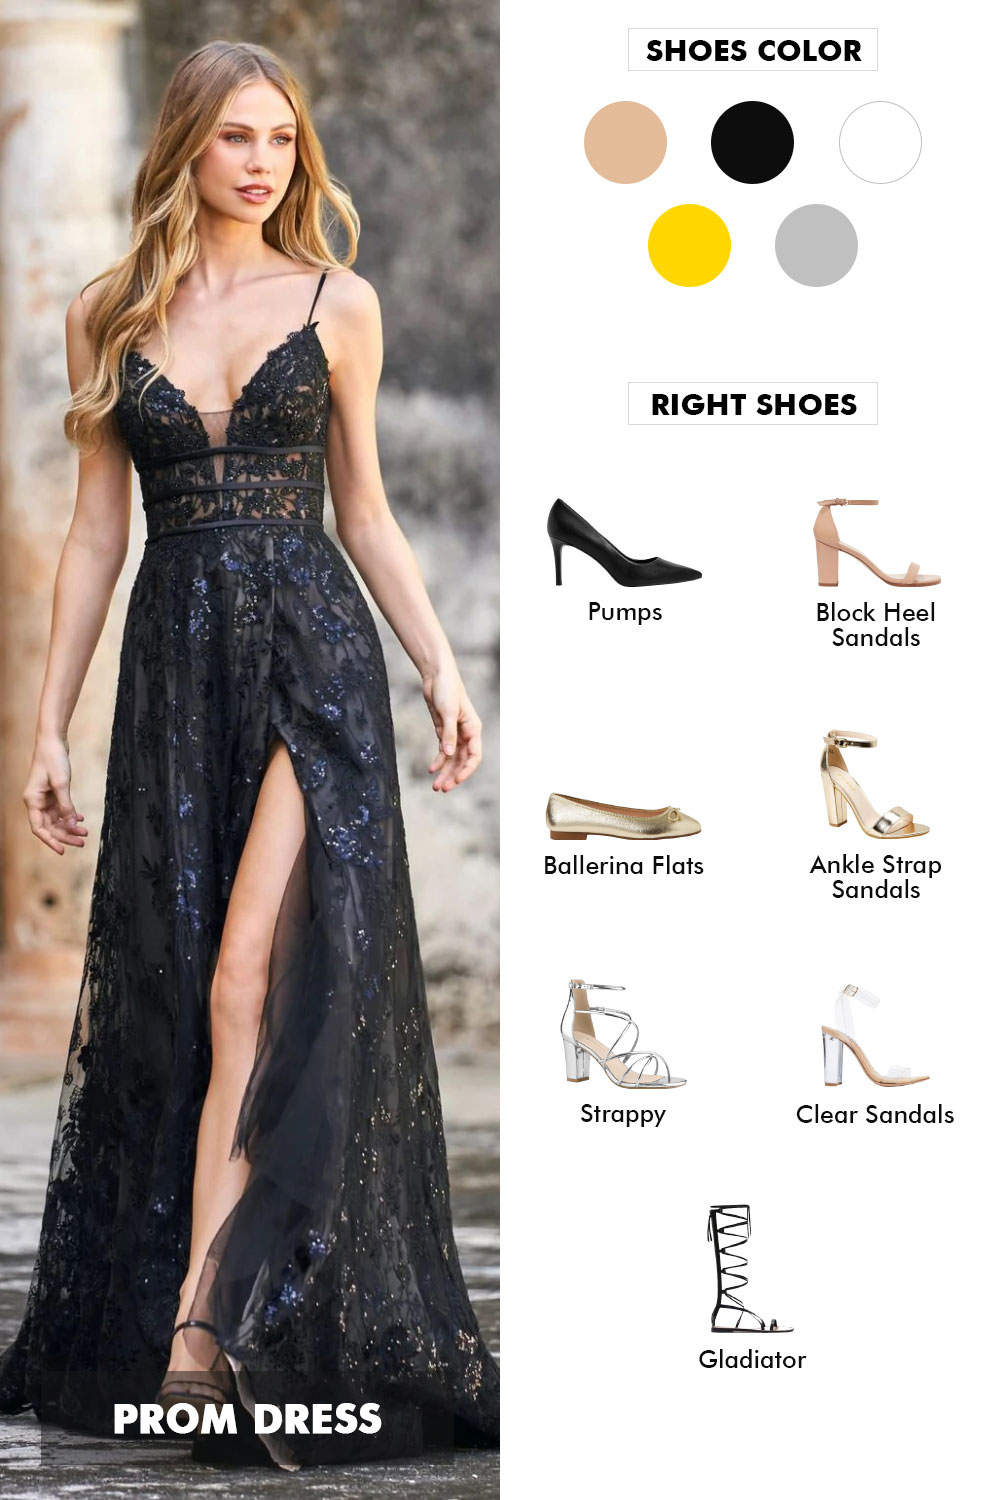 nude shoes with black dress